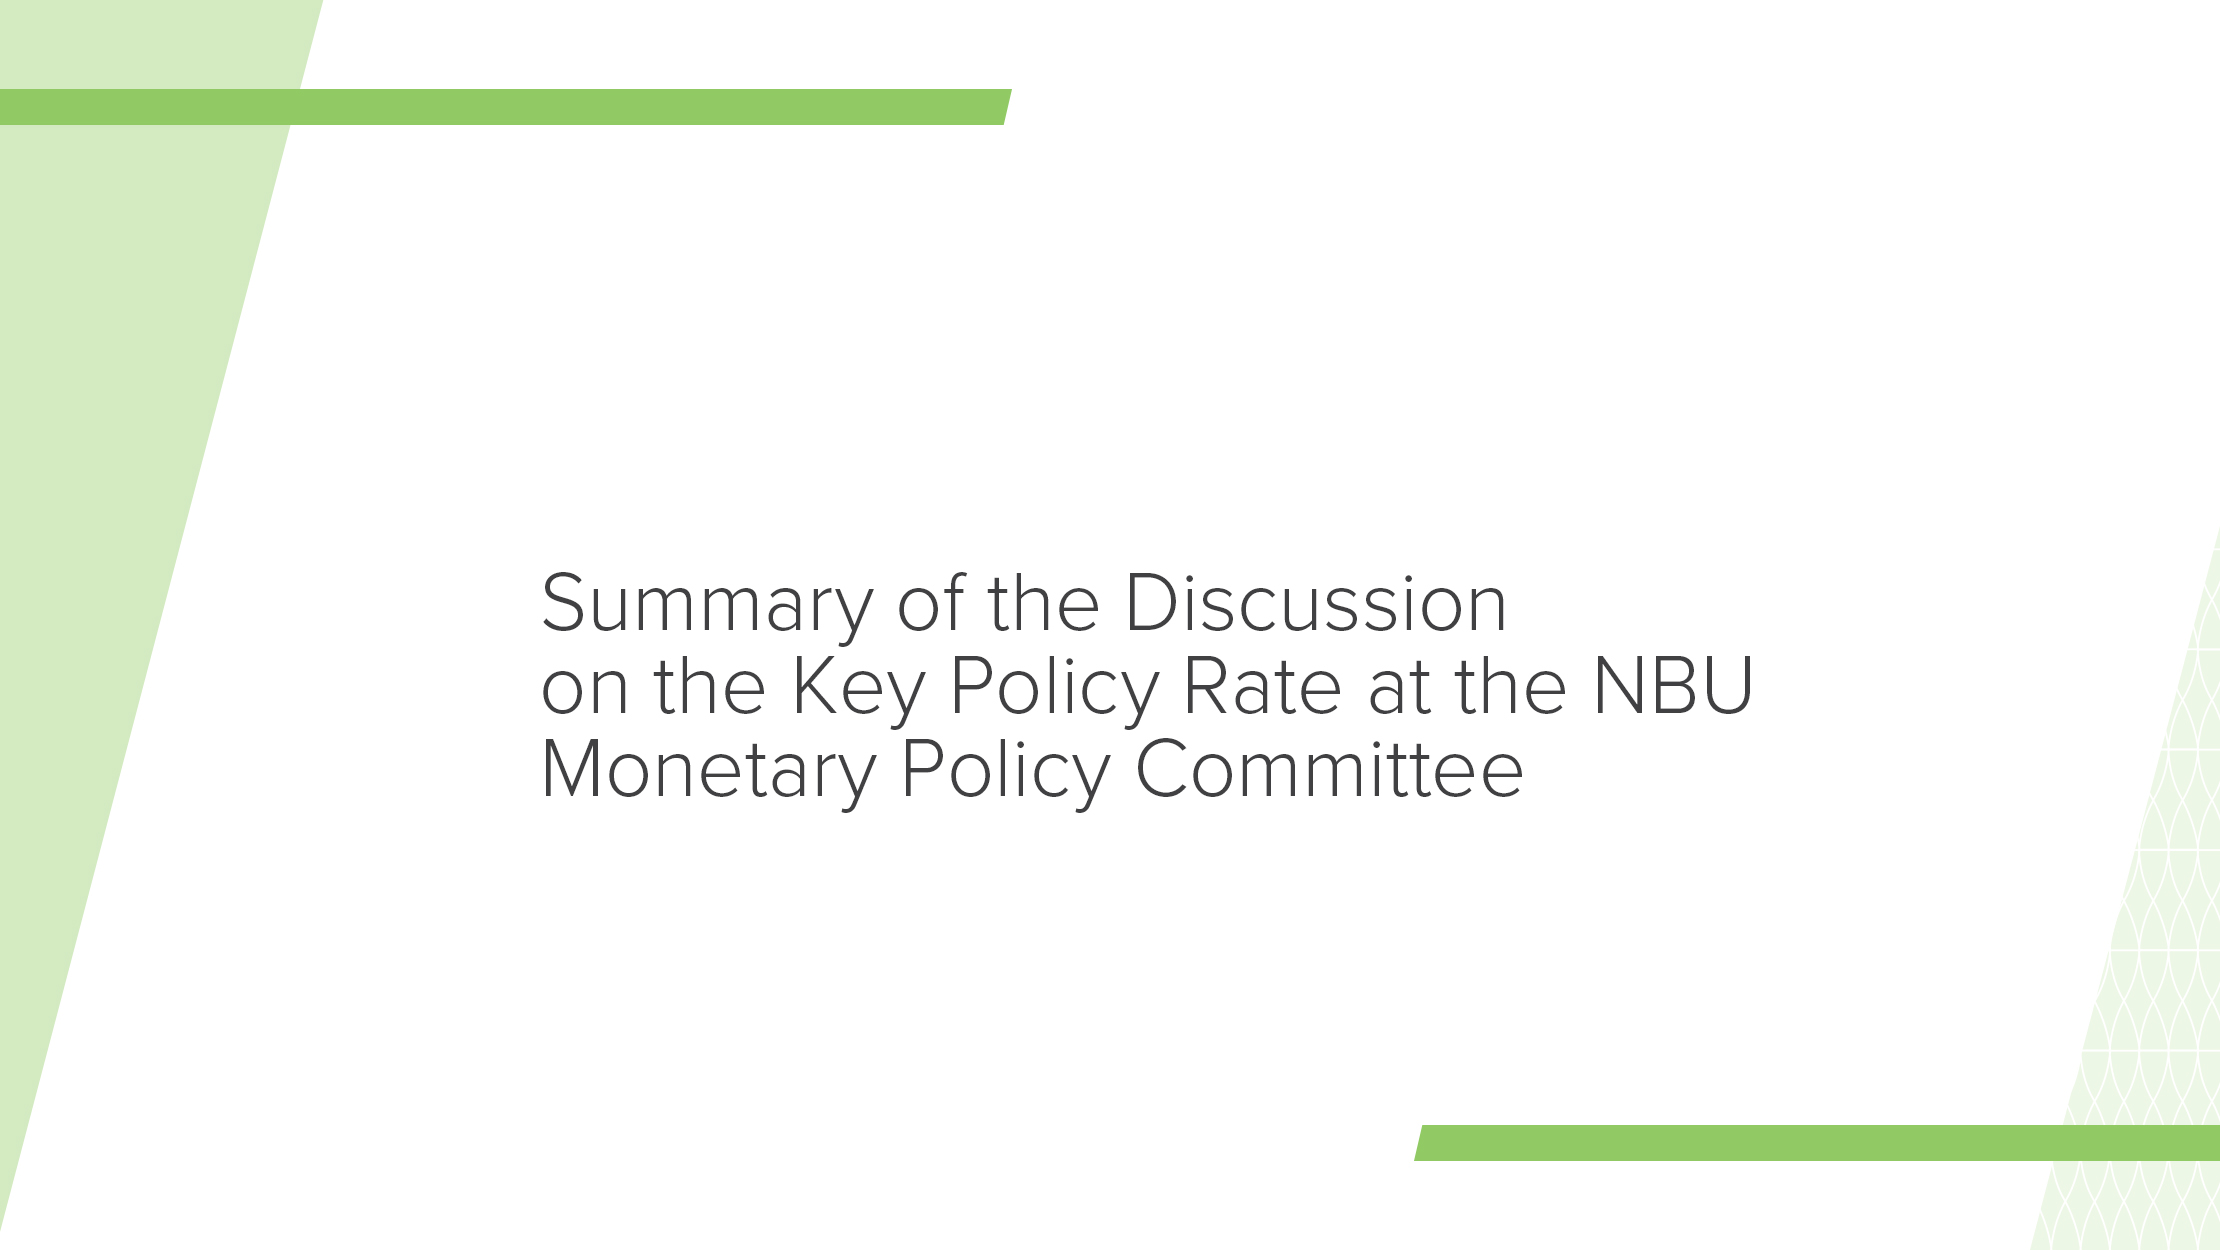 Summary of the Discussion on the Key Policy Rate at the NBU Monetary Policy Committee, 5 September 2018